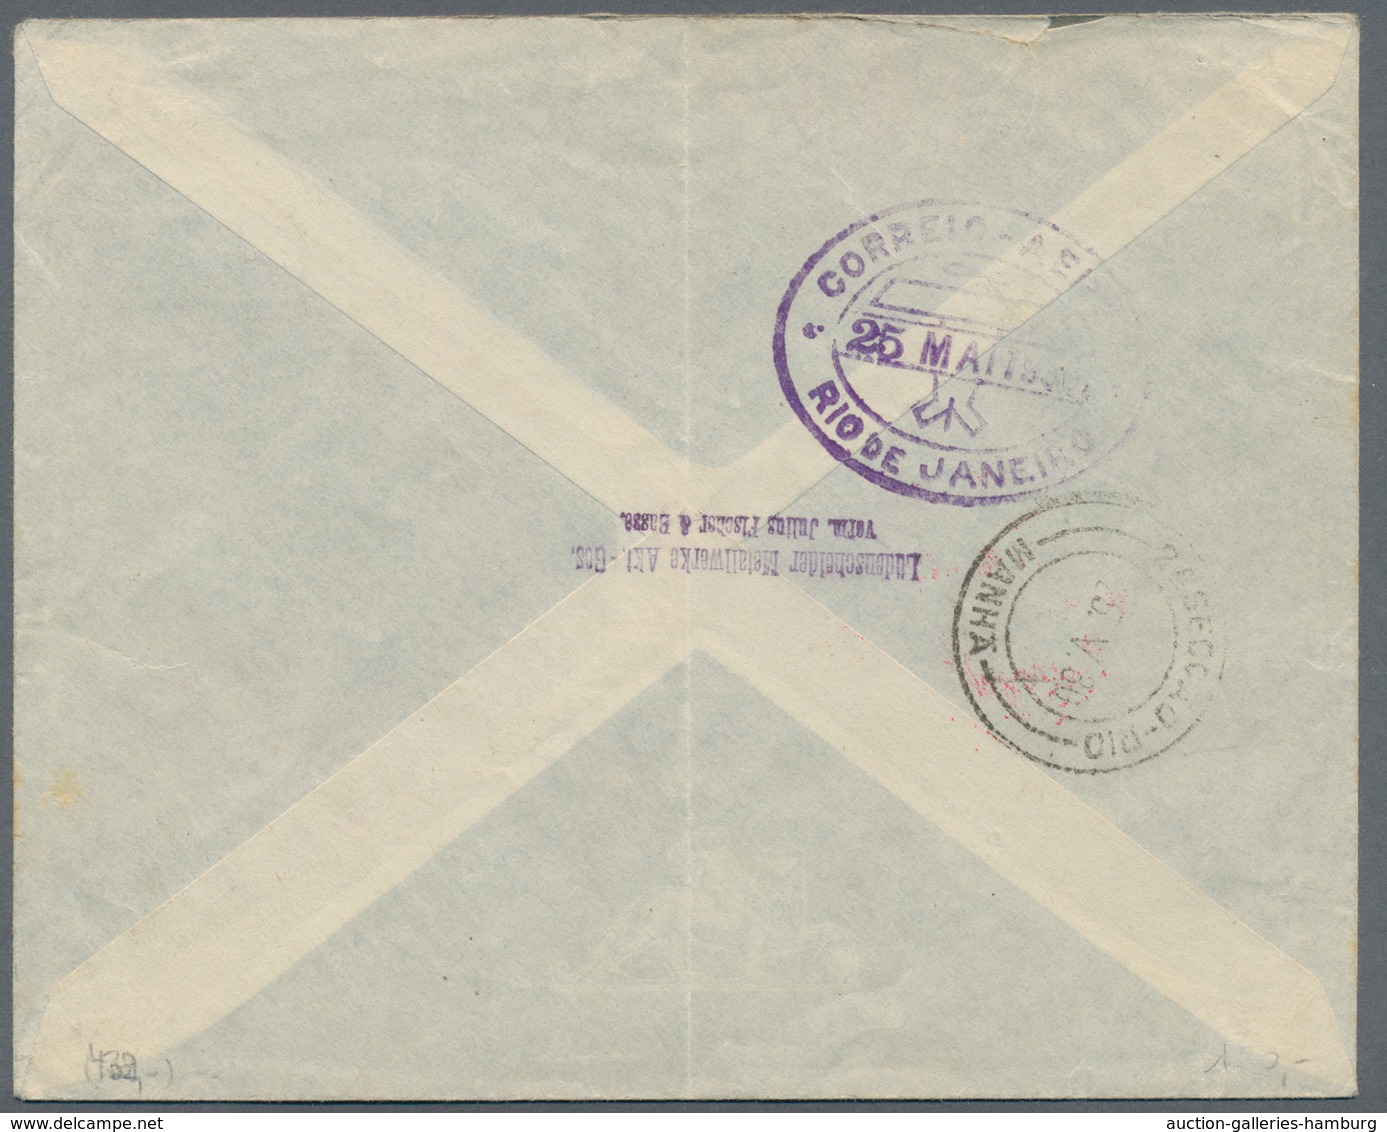 Zeppelinpost Deutschland: 1930, South America Flight 2 RM And 4 RM On Two Covers (1x Crease) From Le - Luft- Und Zeppelinpost